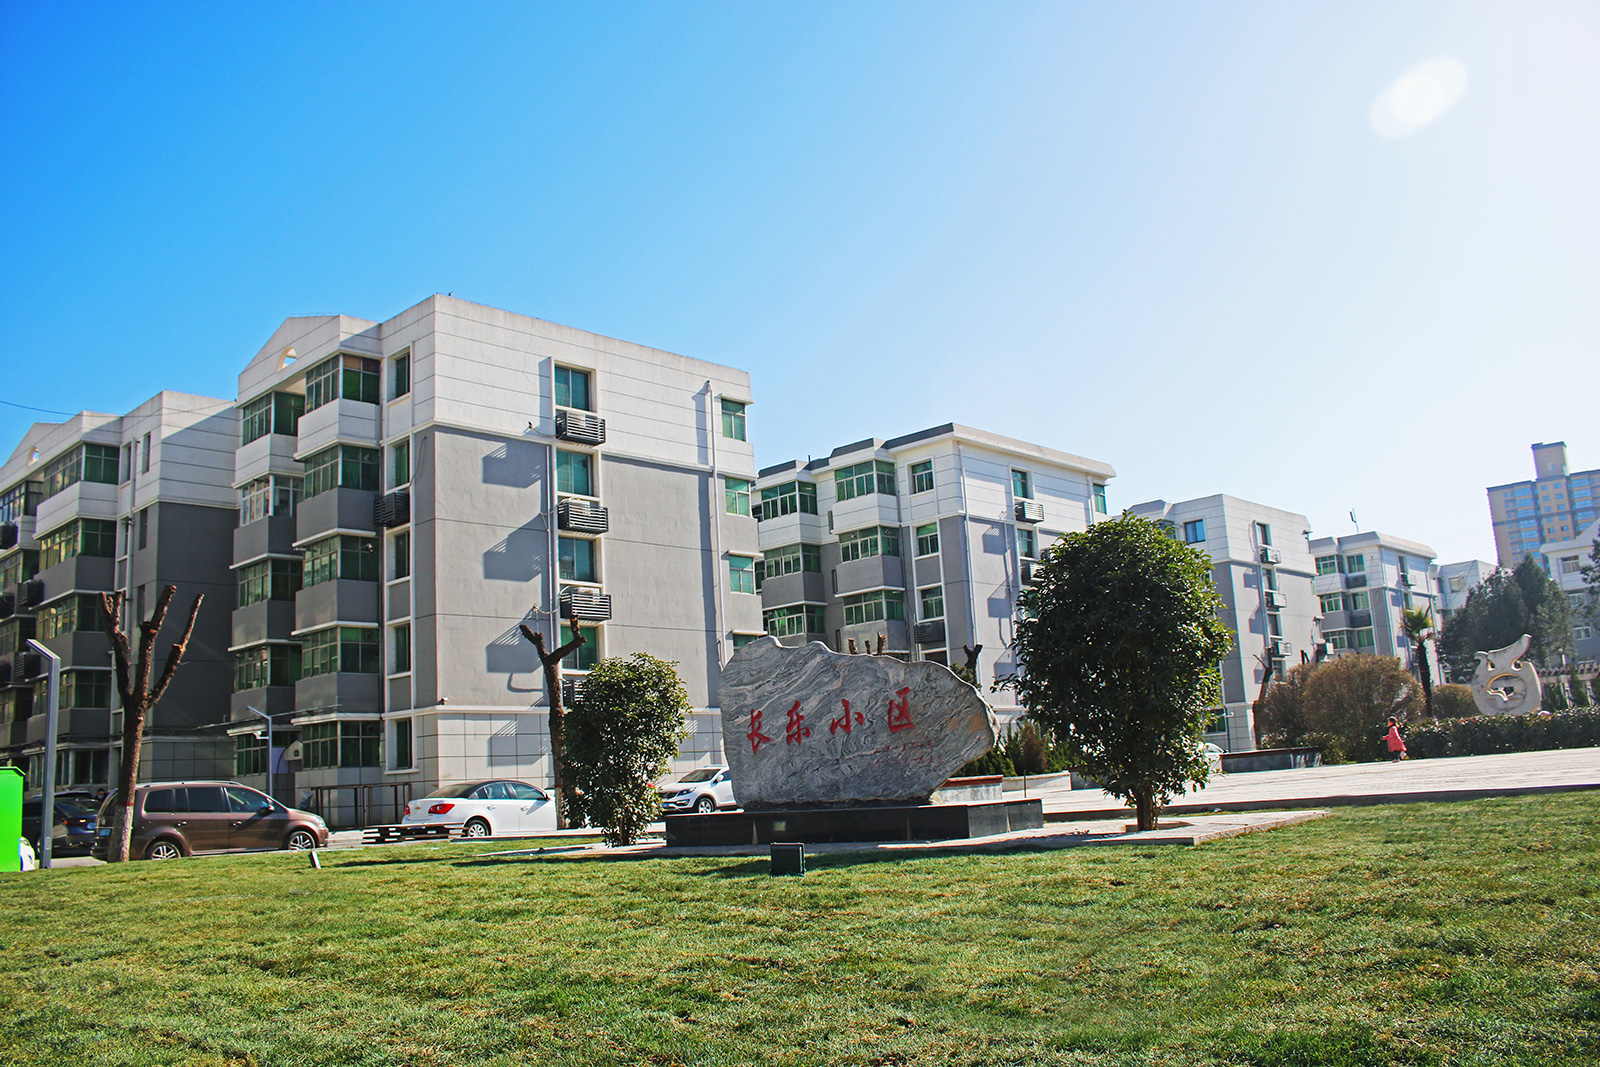 Upgrading of dilapidated apartment buildings in Chang'an District of Xi'an City in Shaanxi Province